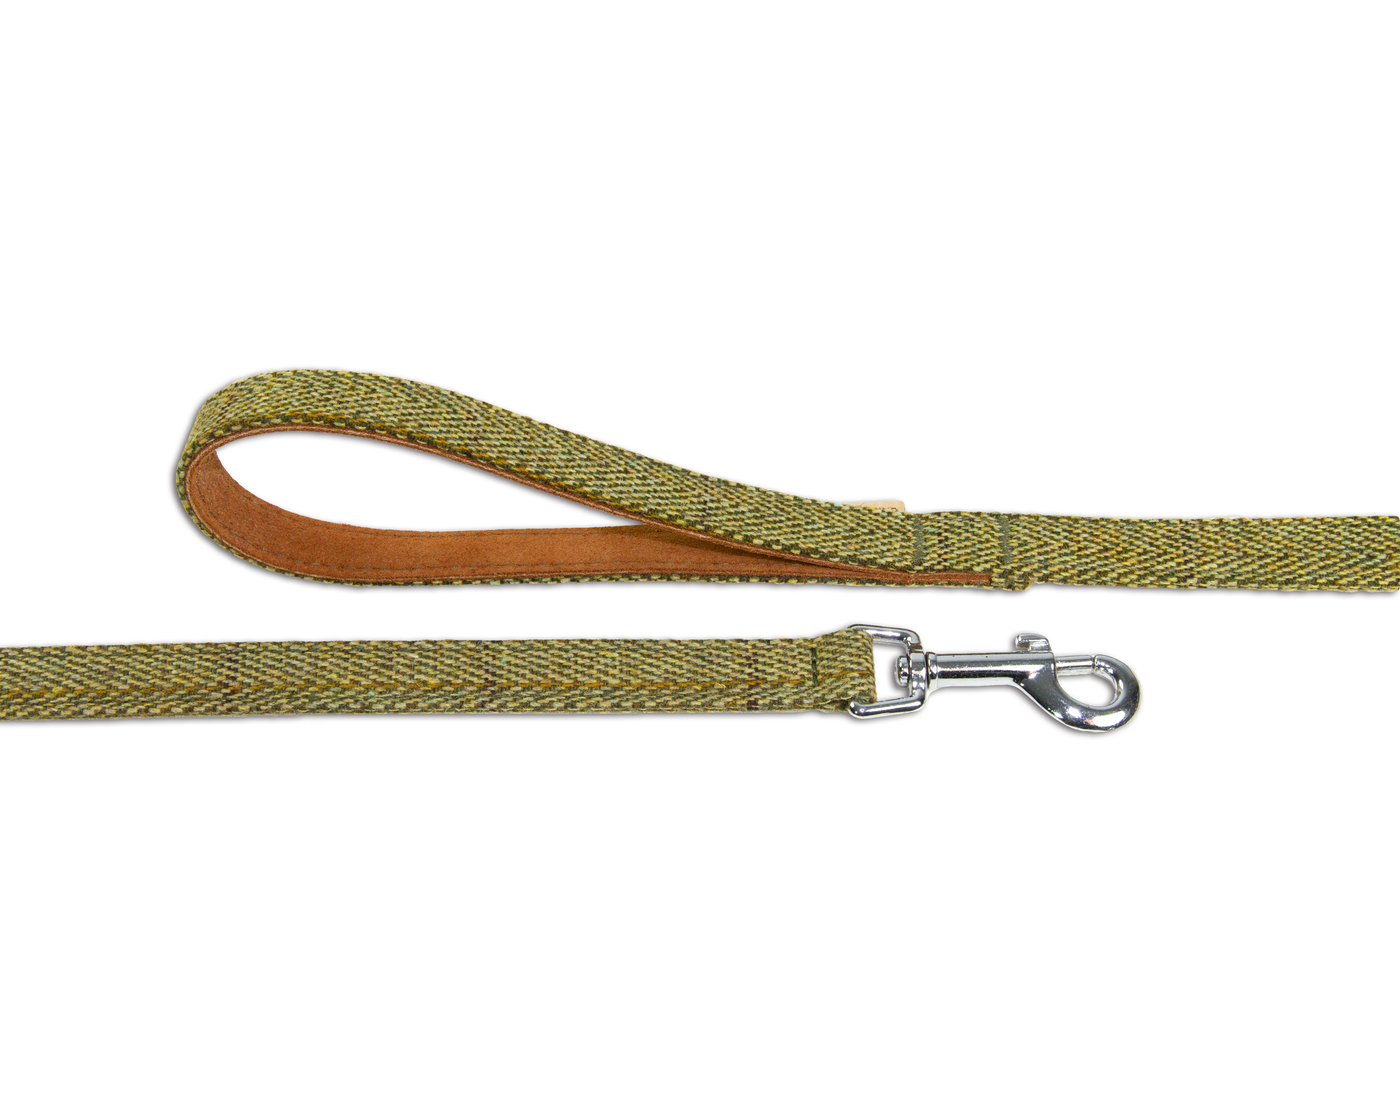 Close up of tweed green dog lead